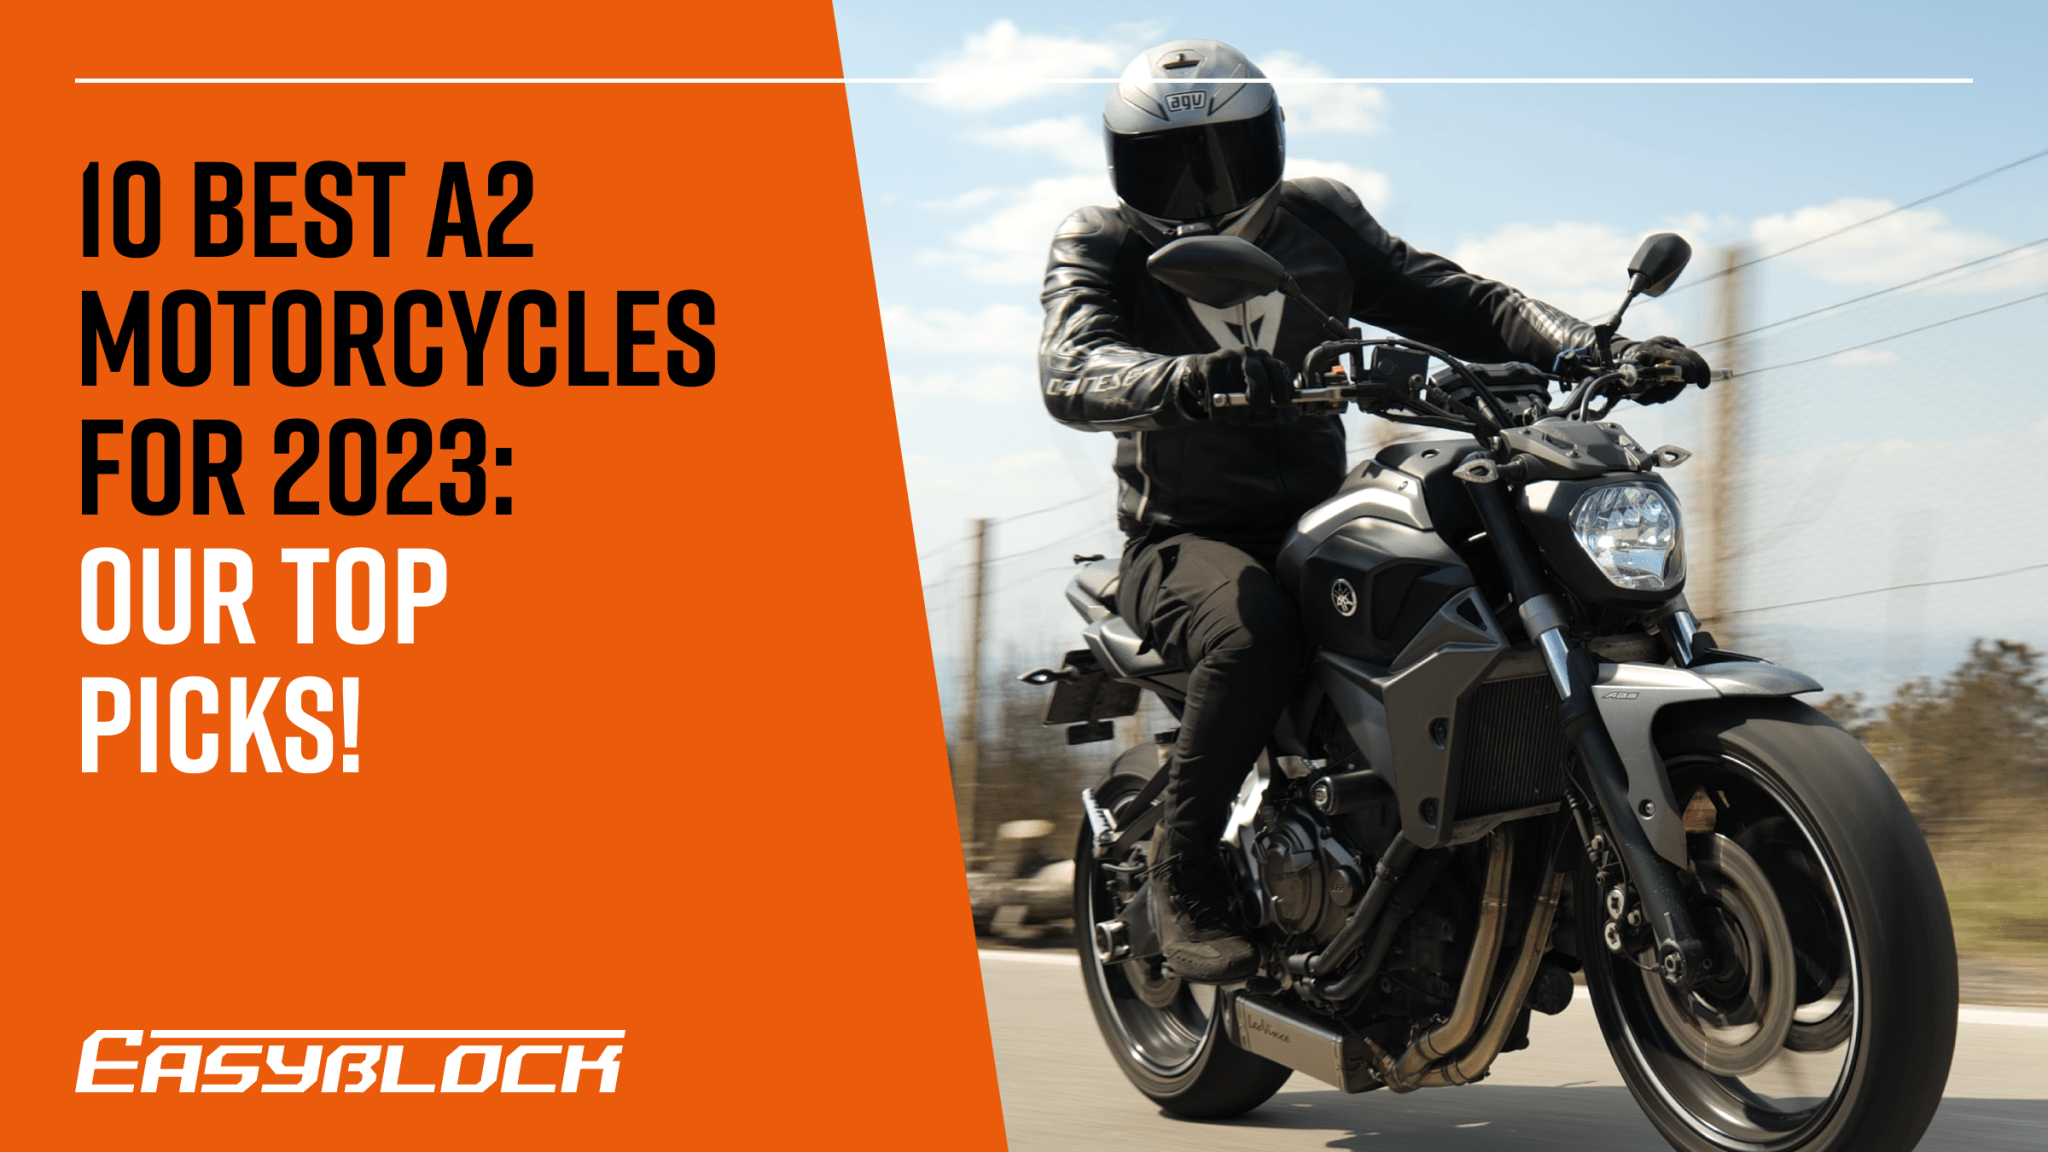 10 Best A2 Motorcycles for 2023 (UK Edition) – EasyBlock